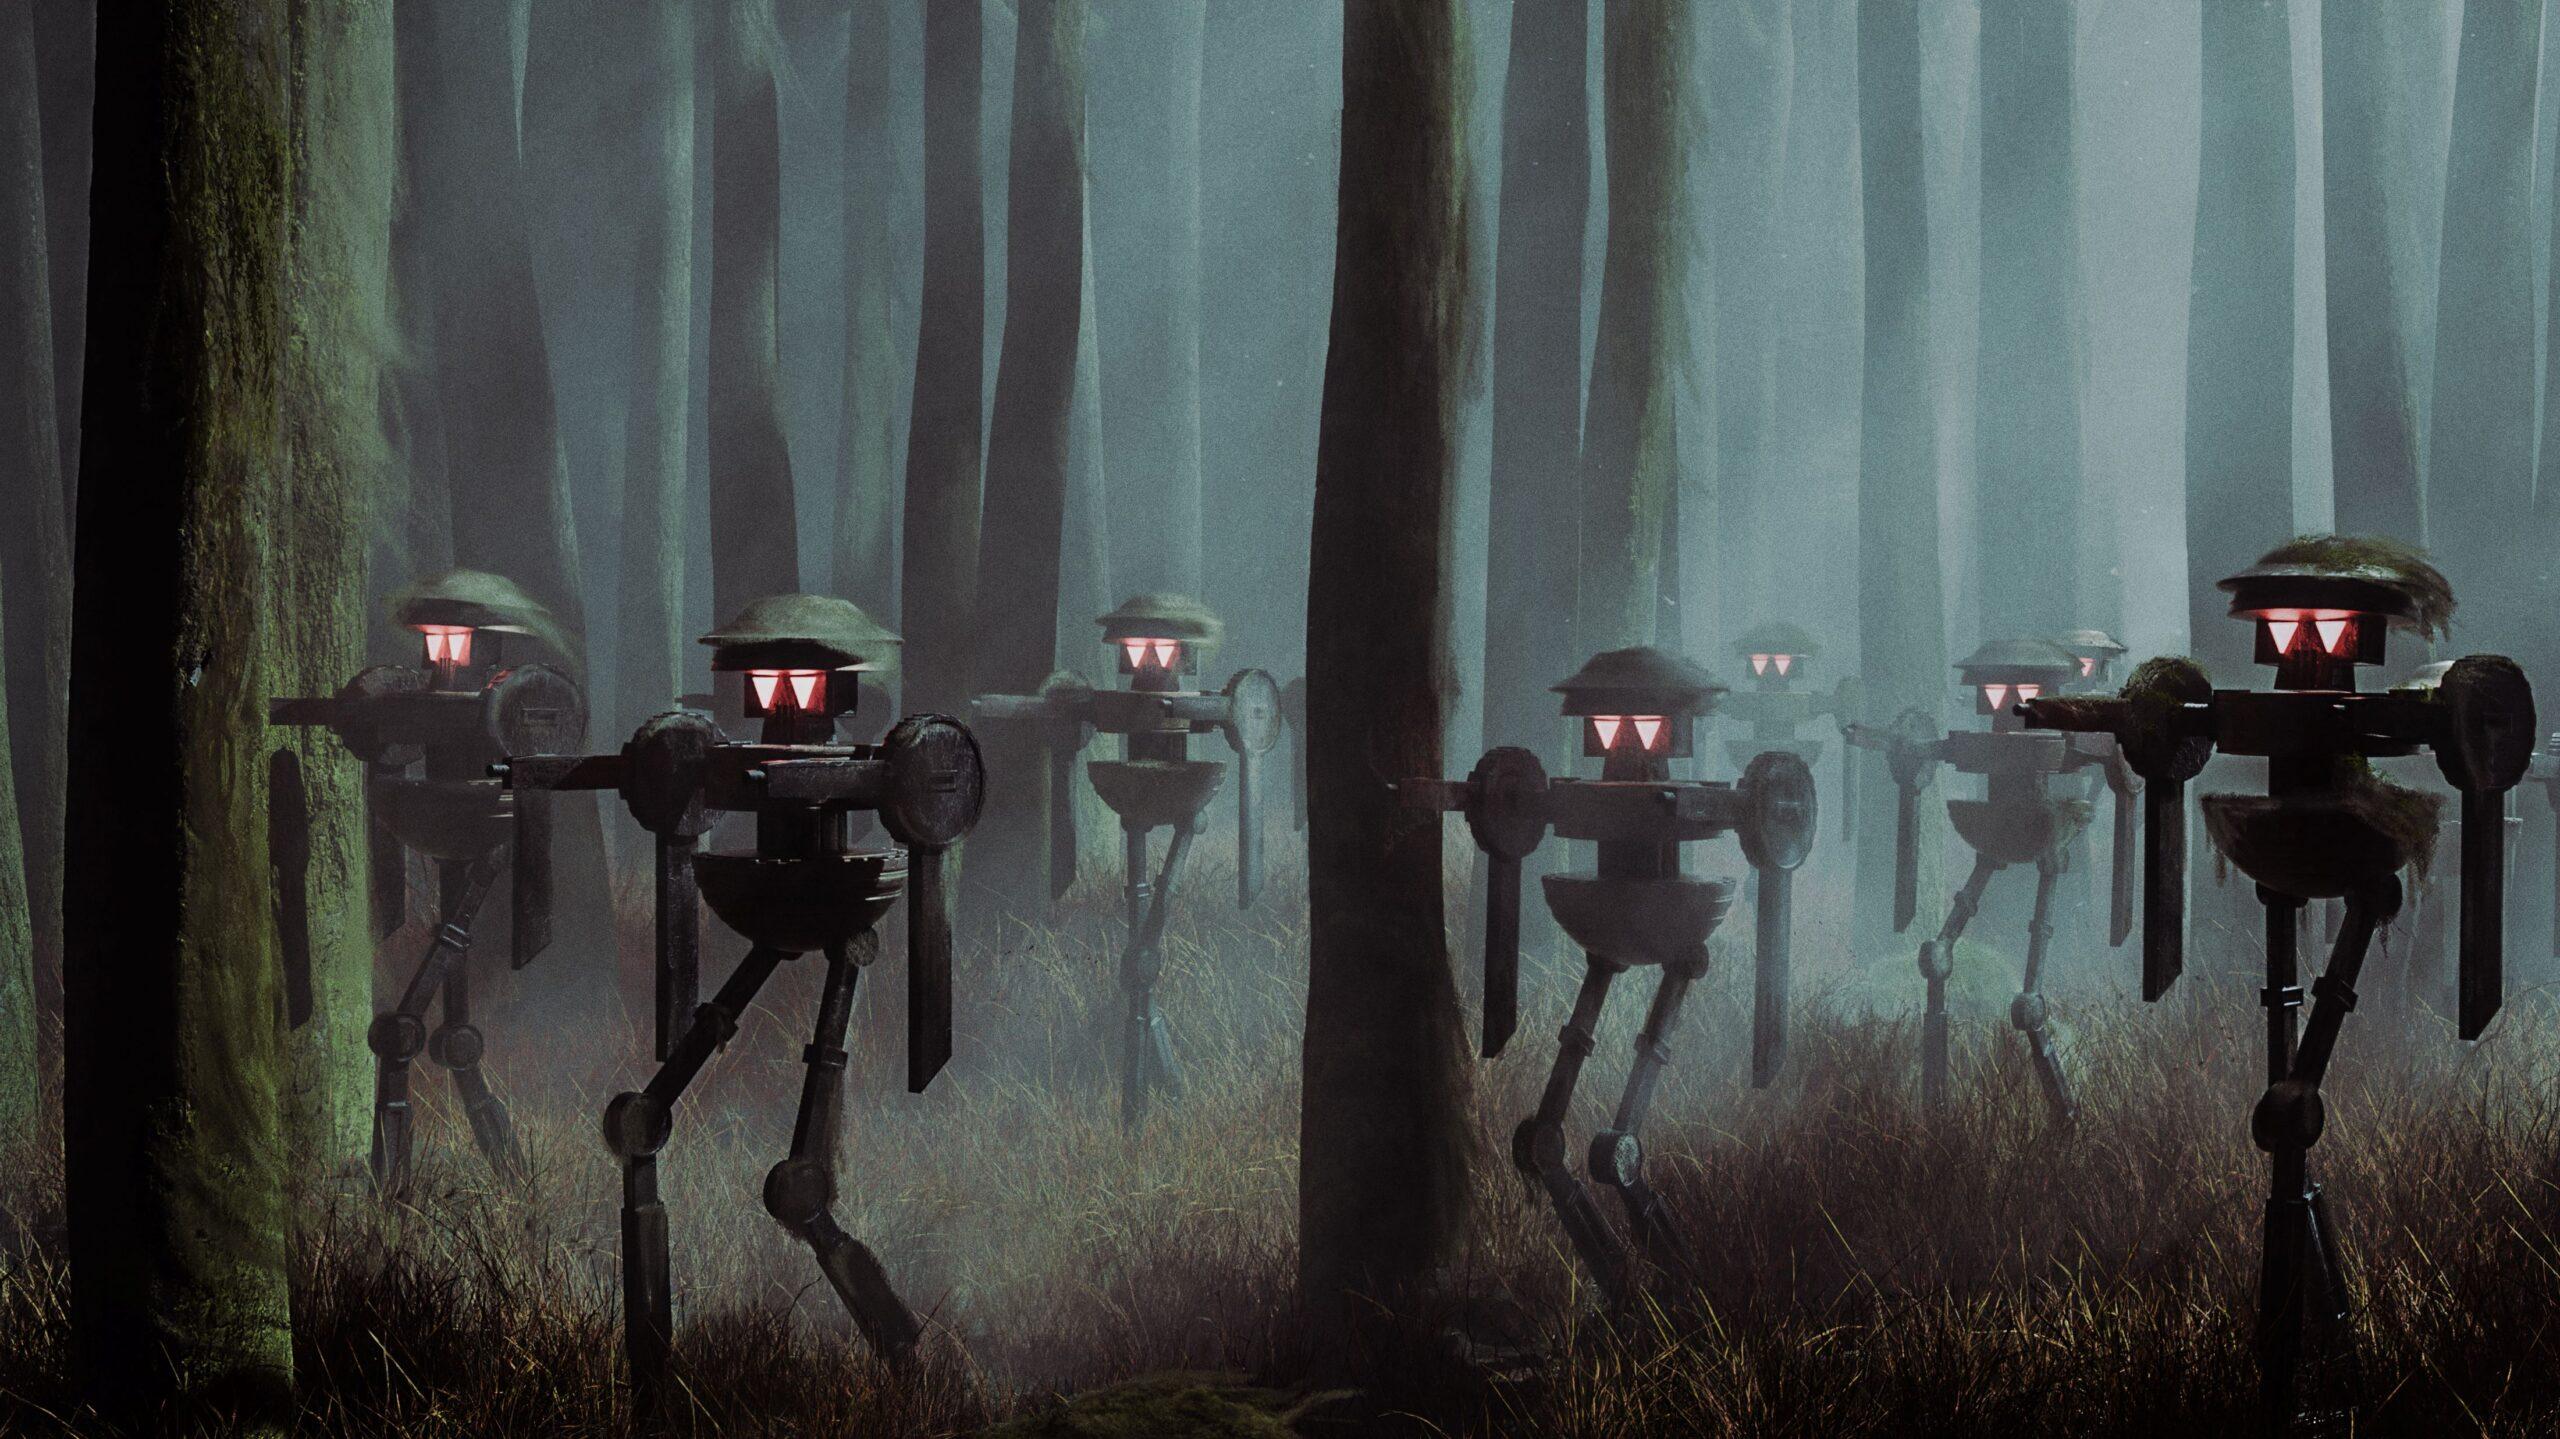 Group of robots with illuminated eyes pictured in a forest at night.